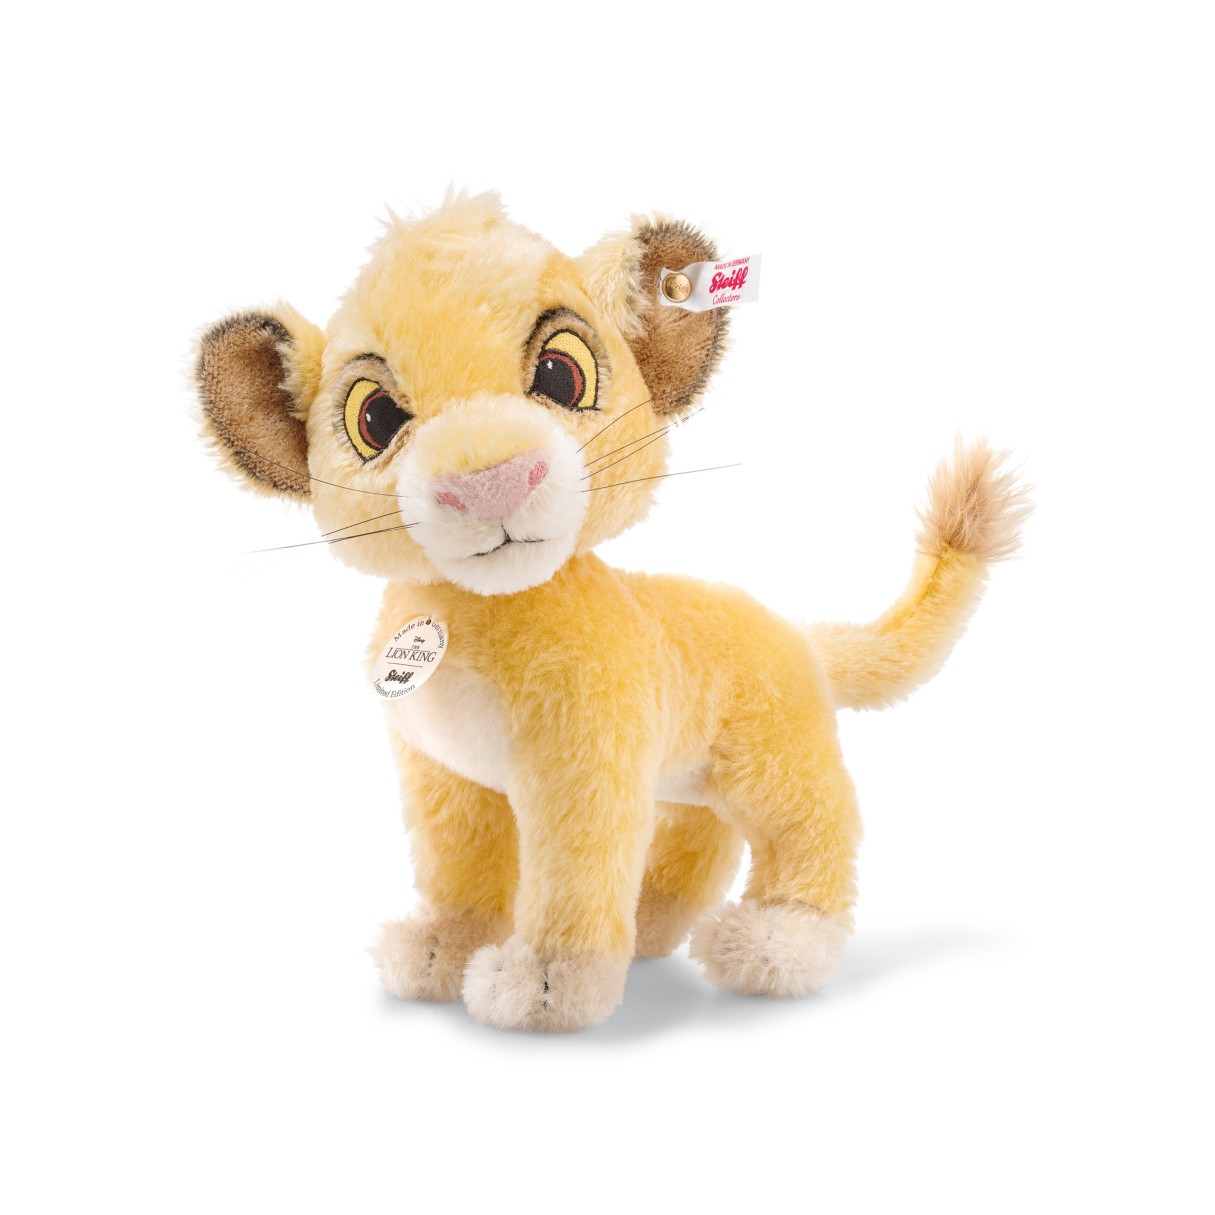 Simba Collectible by Steiff – 10'' – Limited Edition